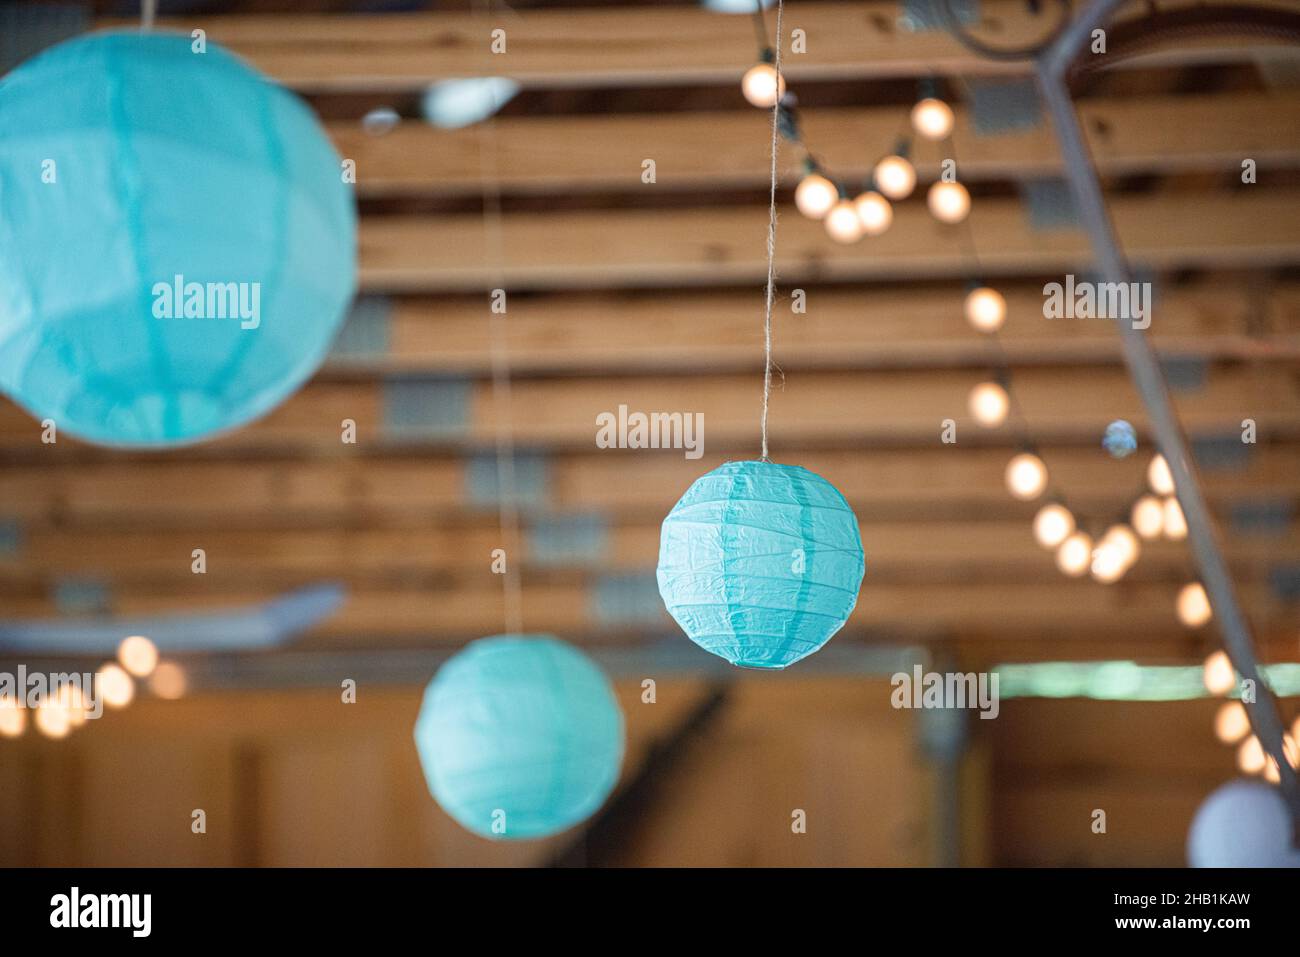 Many Blue round paper lanterns hanging from wood beam ceiling with bokeh Stock Photo